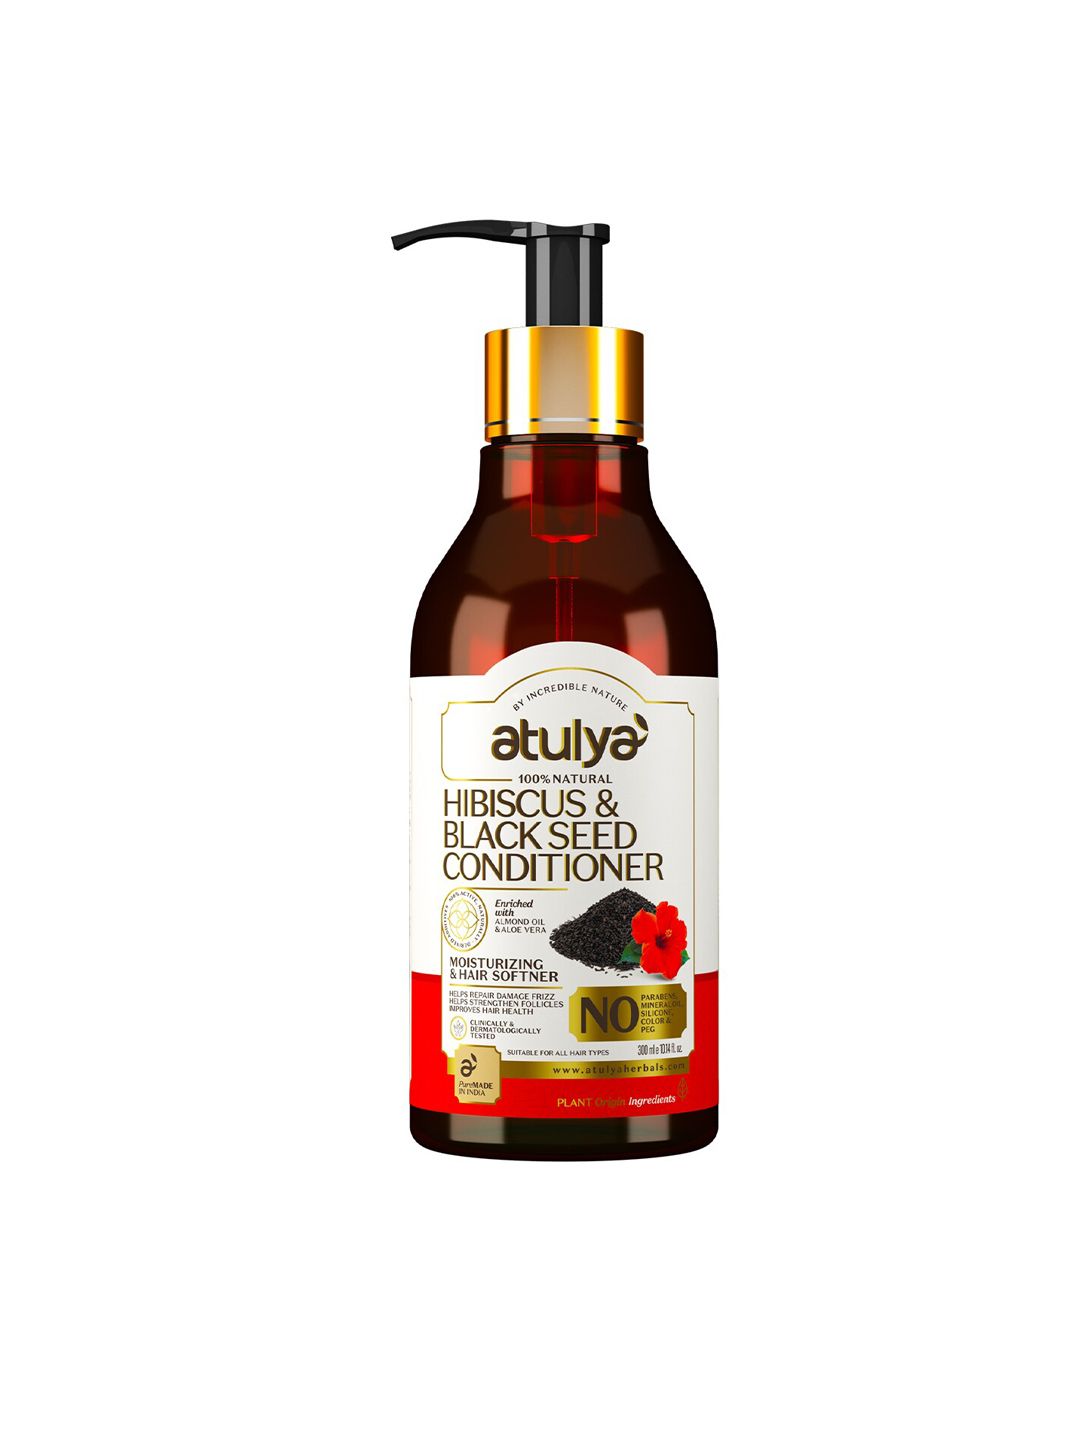 Atulya Hibiscus & Black Seed Hair Conditioner with Almond Oil & Aloe Vera - 300 ml Price in India